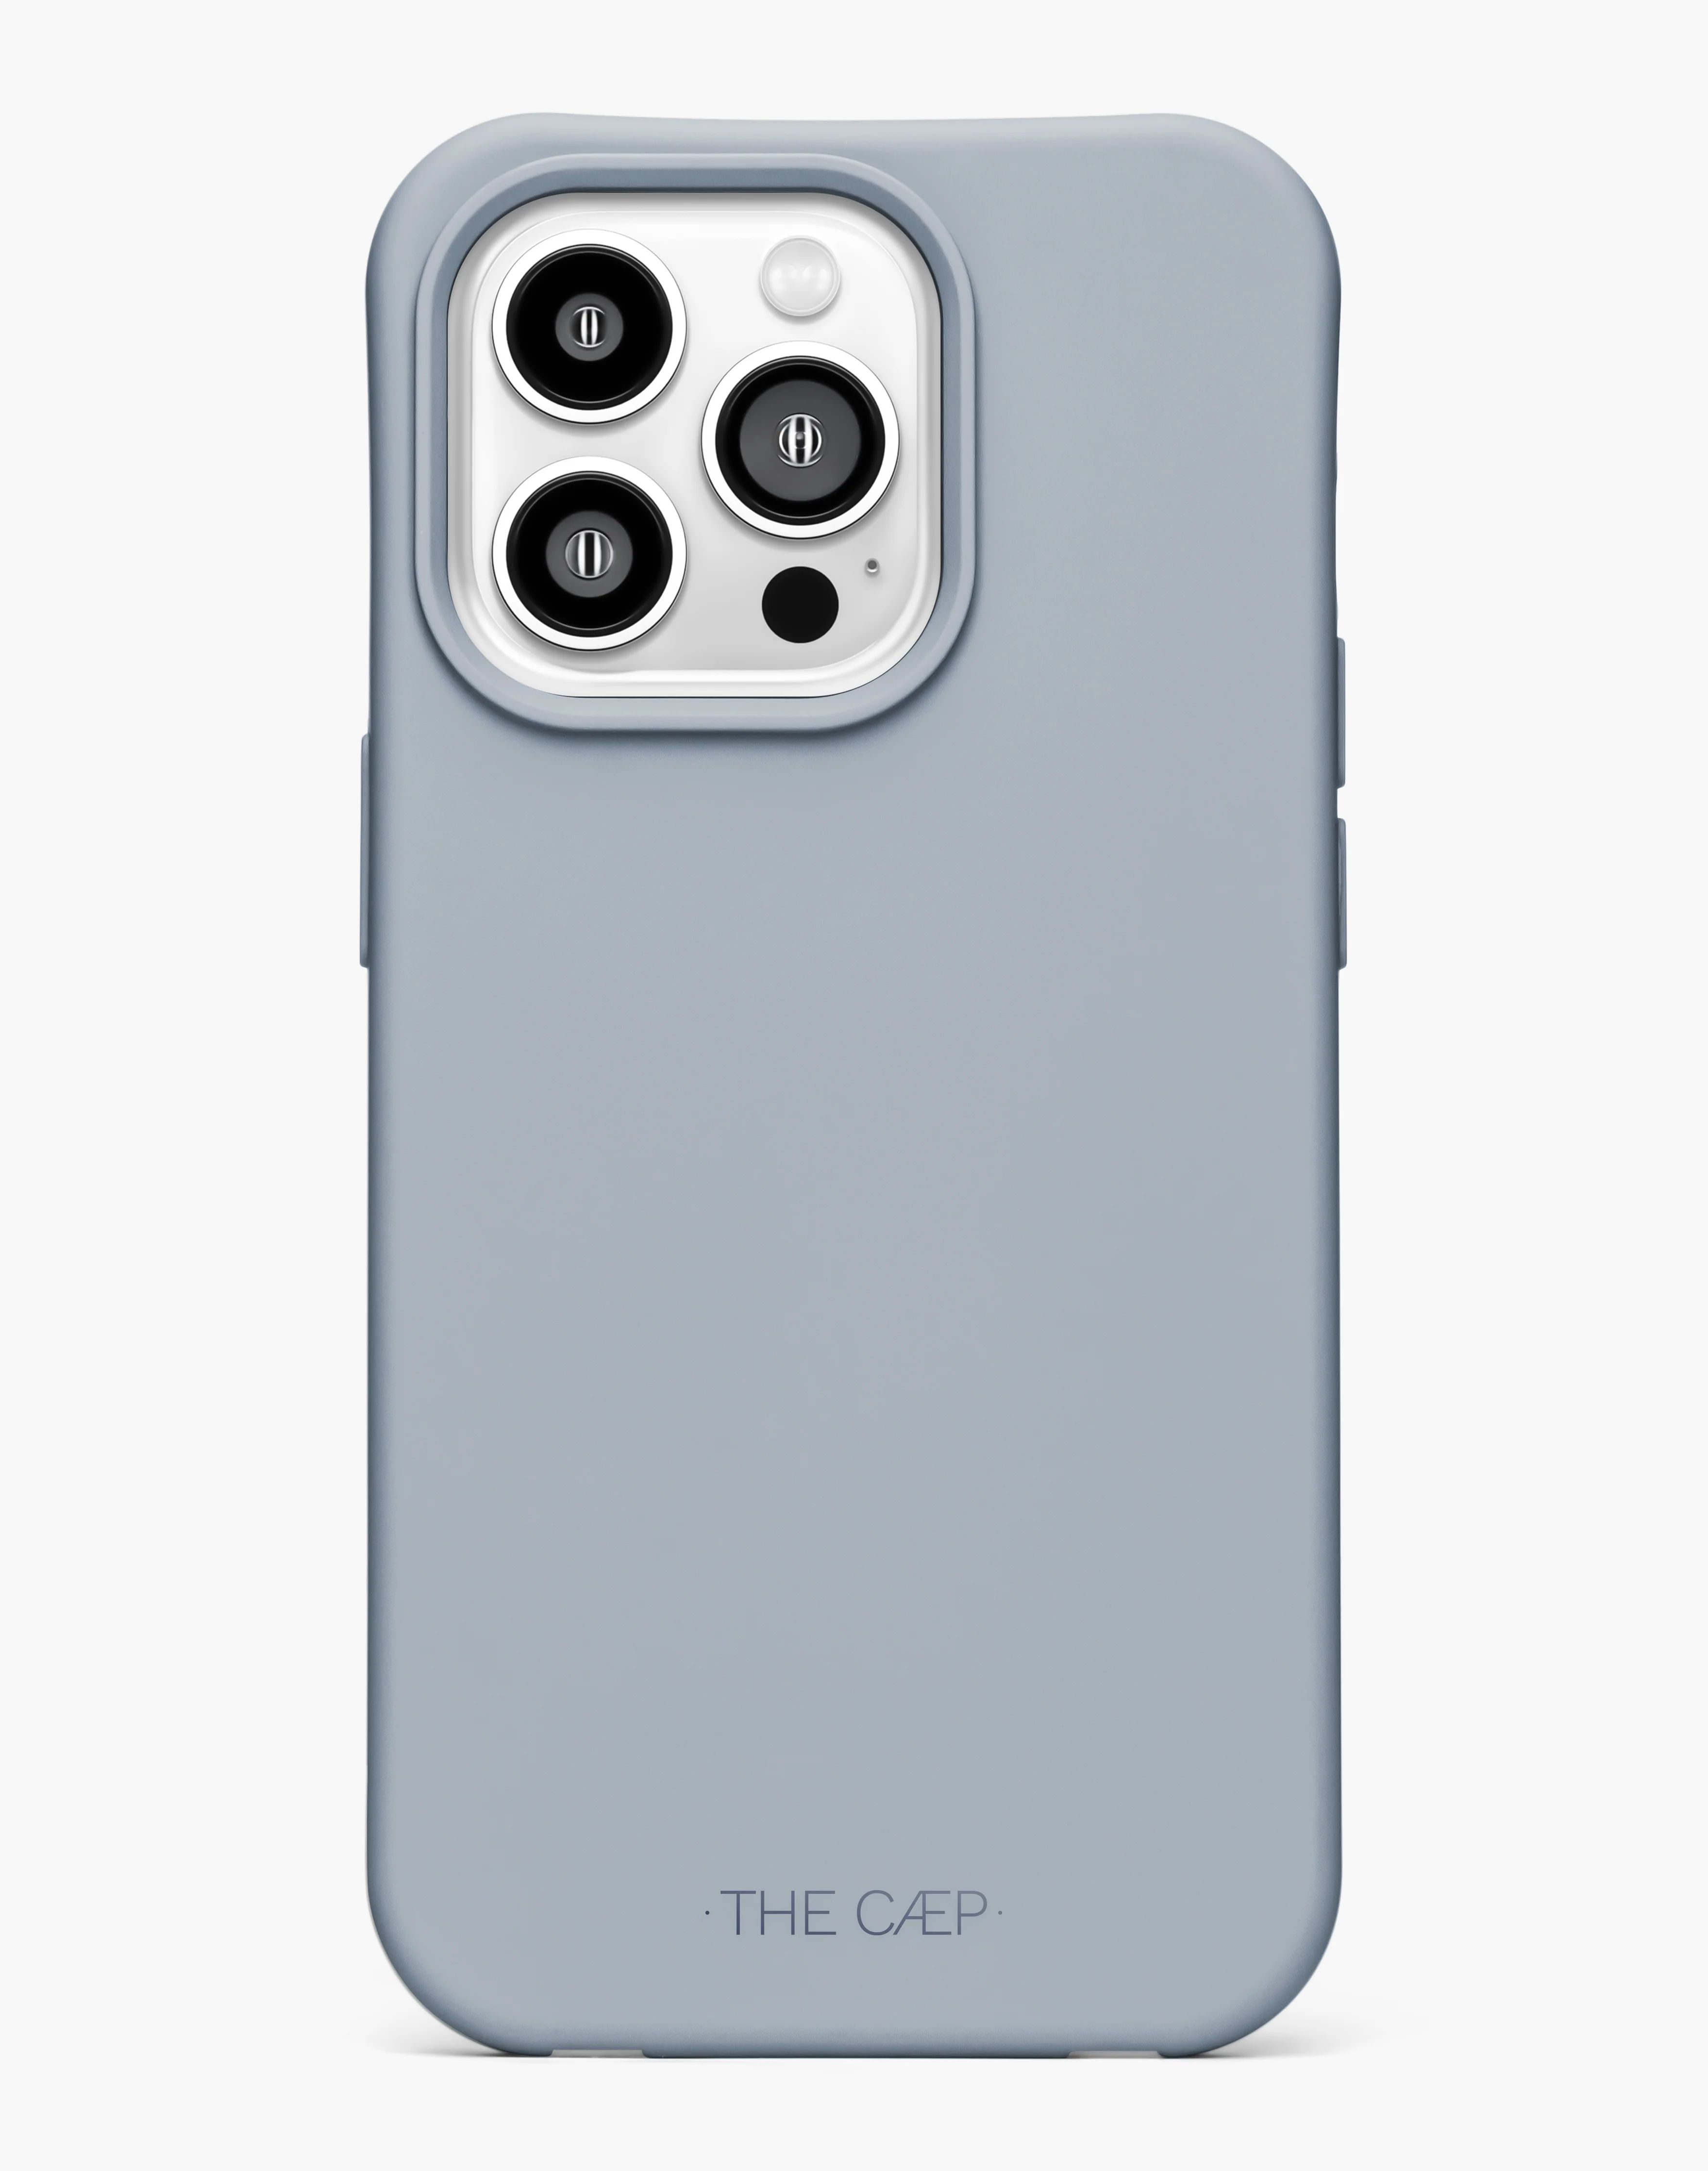 Salty iPhone Case | THE CAEP